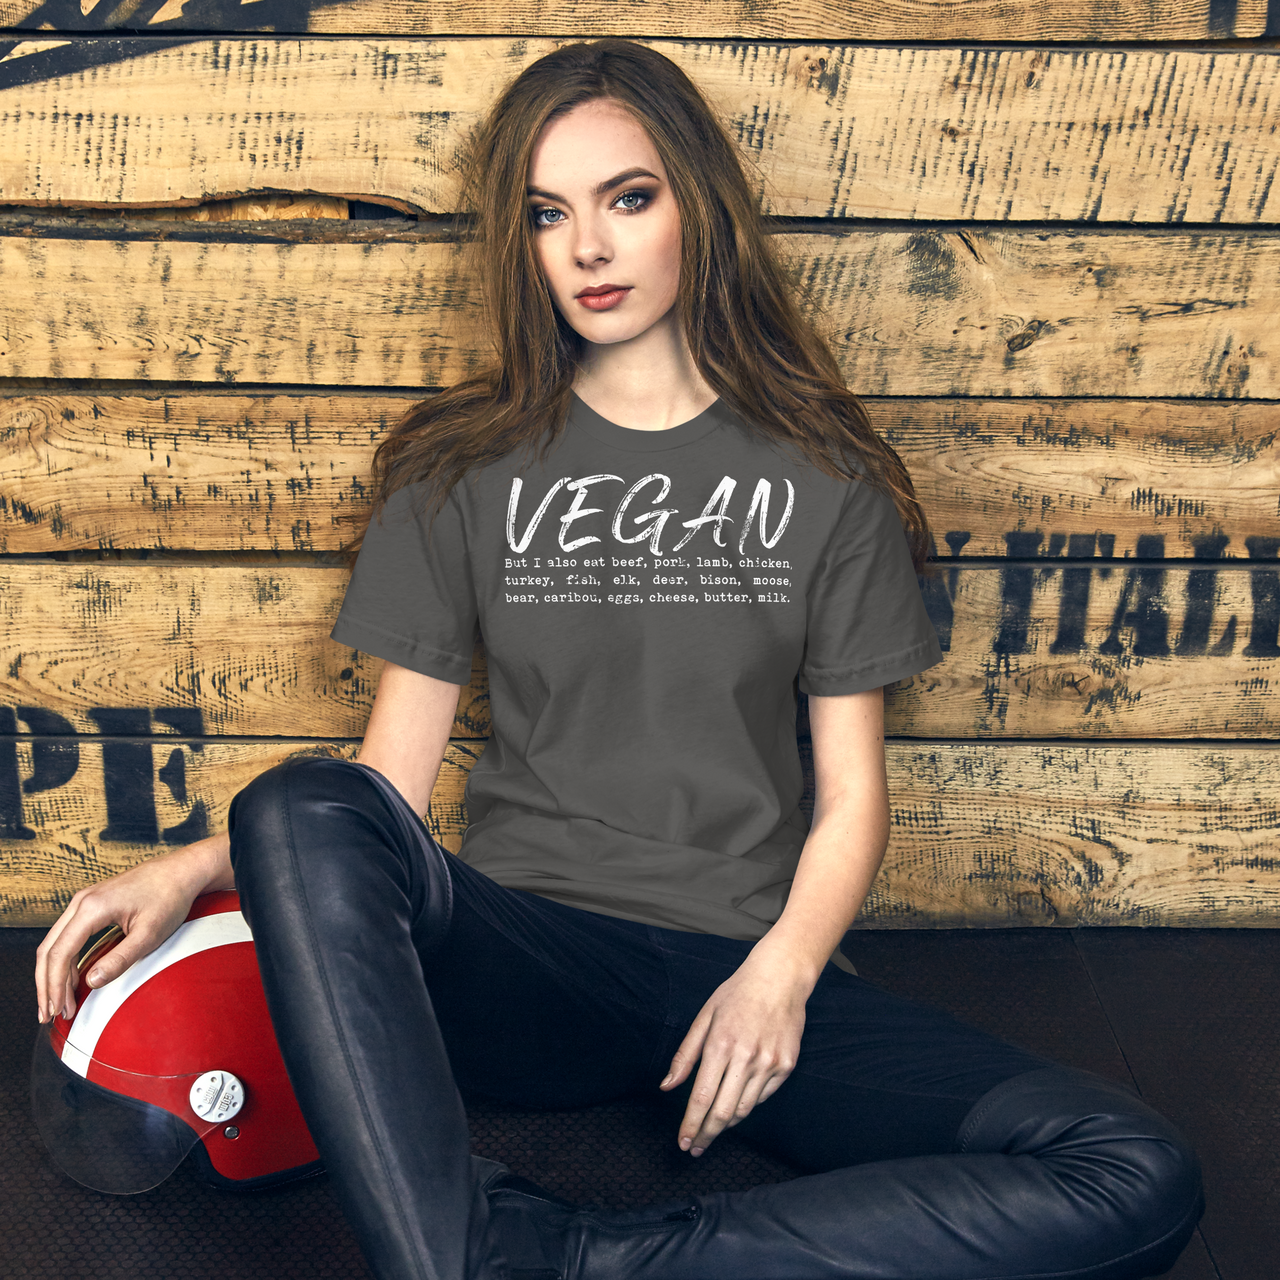 Unveil Your Inner Irony: The 'Vegan' Shirt for Carnivores - Sarcastic Humor Short Sleeve T-shirt